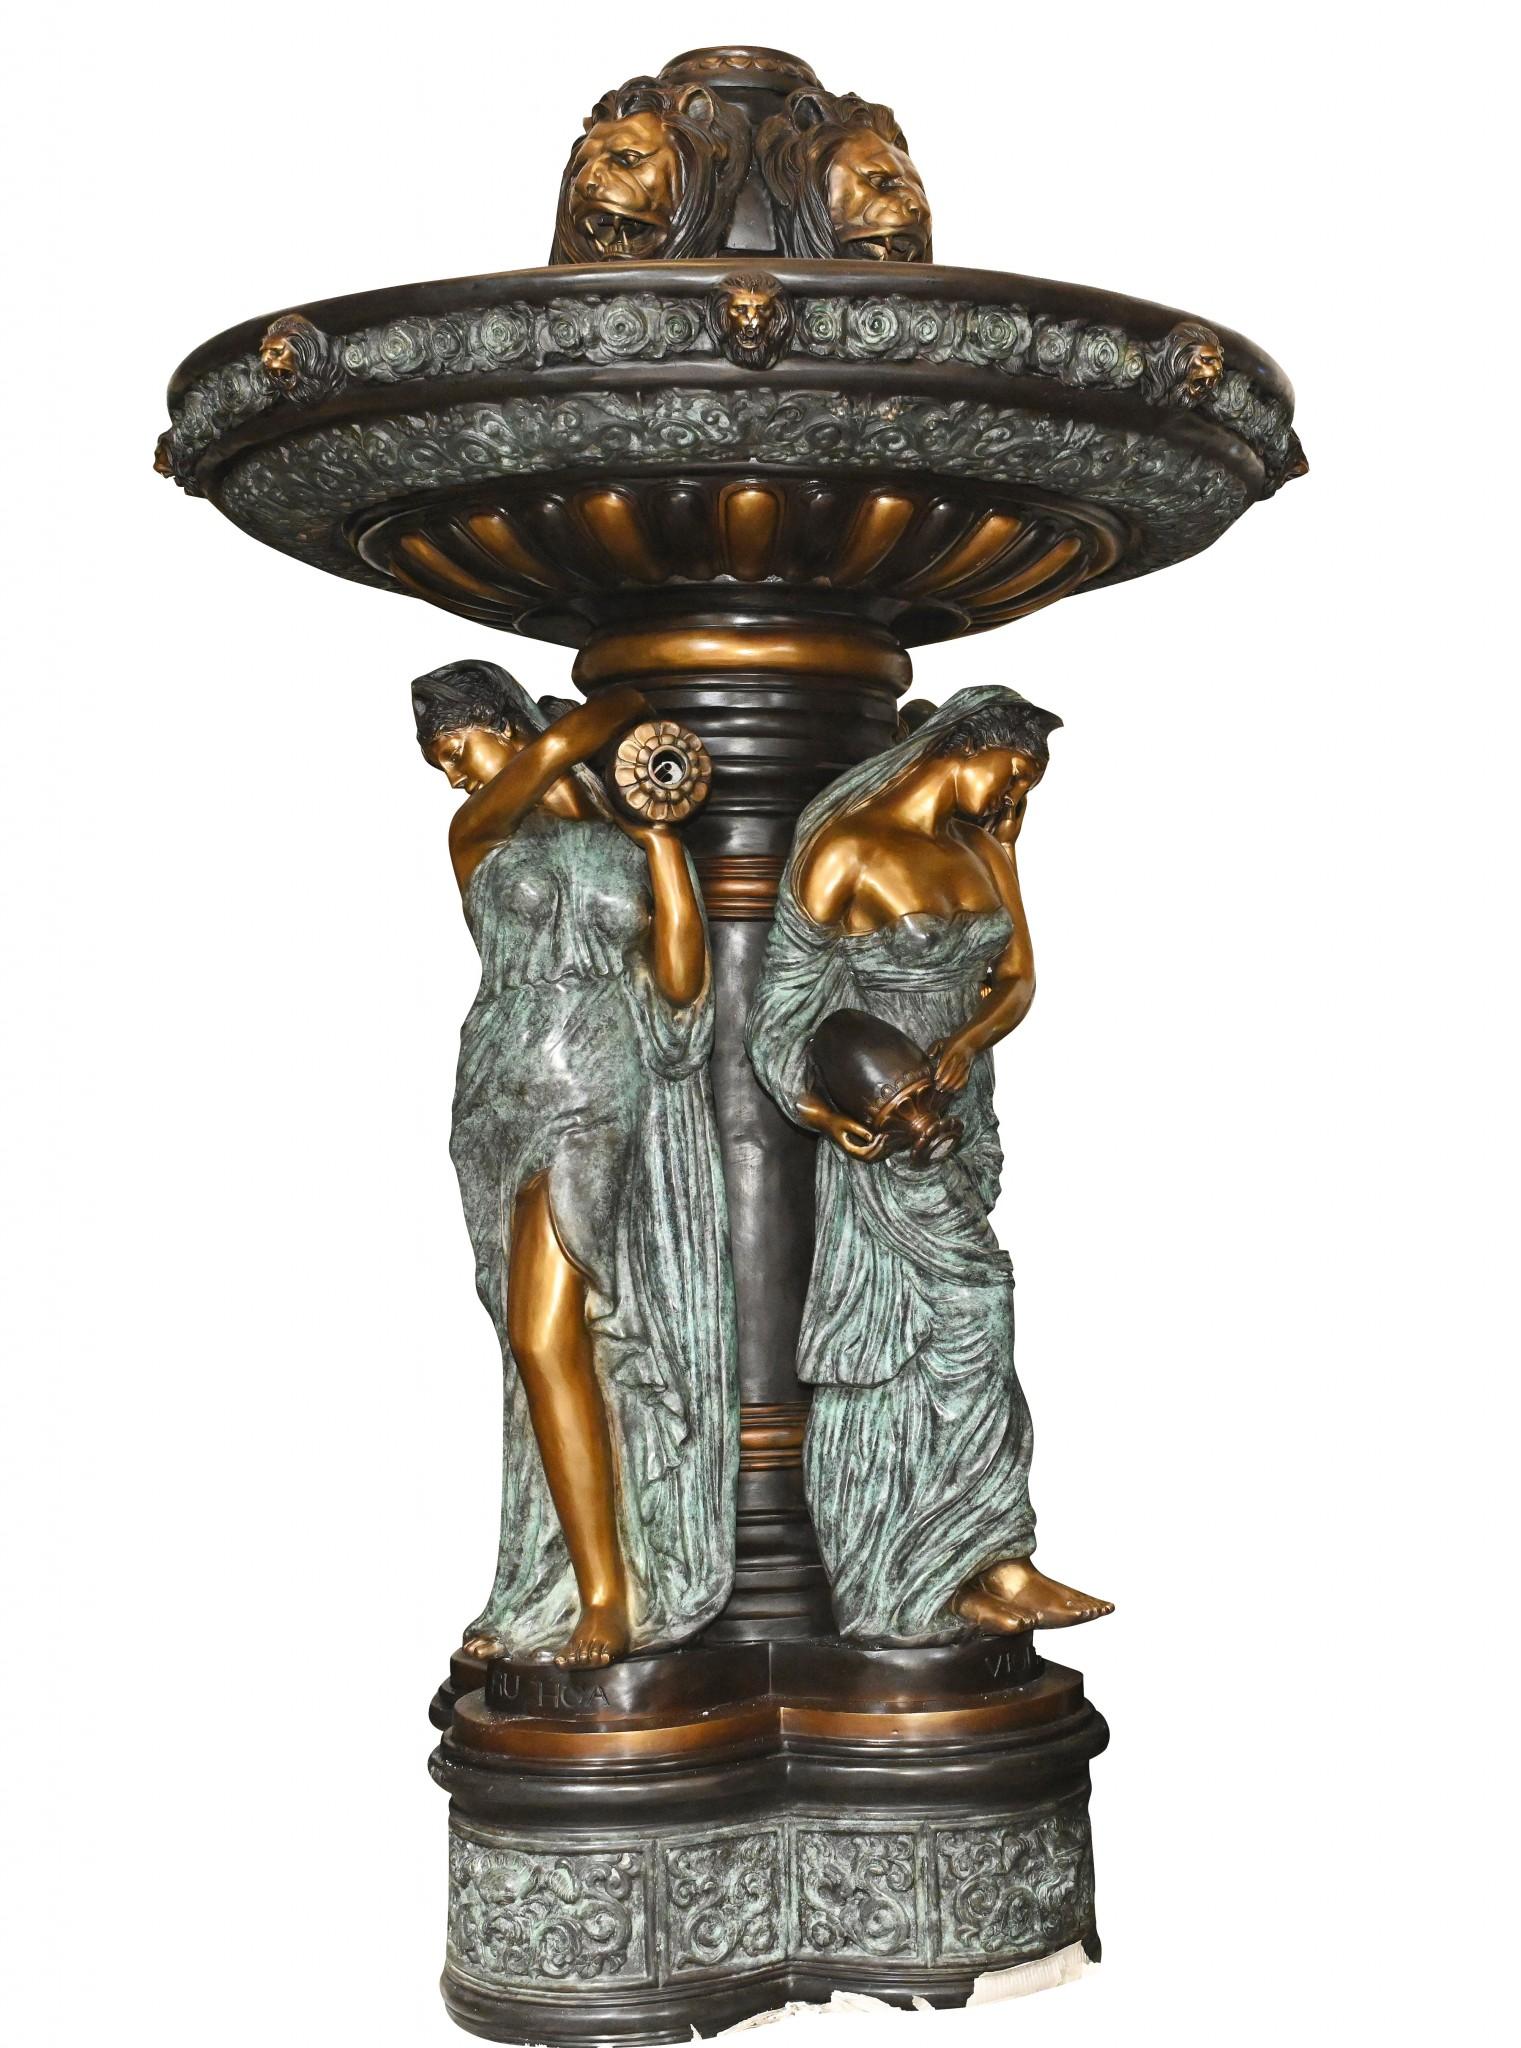 Italian Bronze Fountain, Large Classical Maiden Garden Water Feature For Sale 6